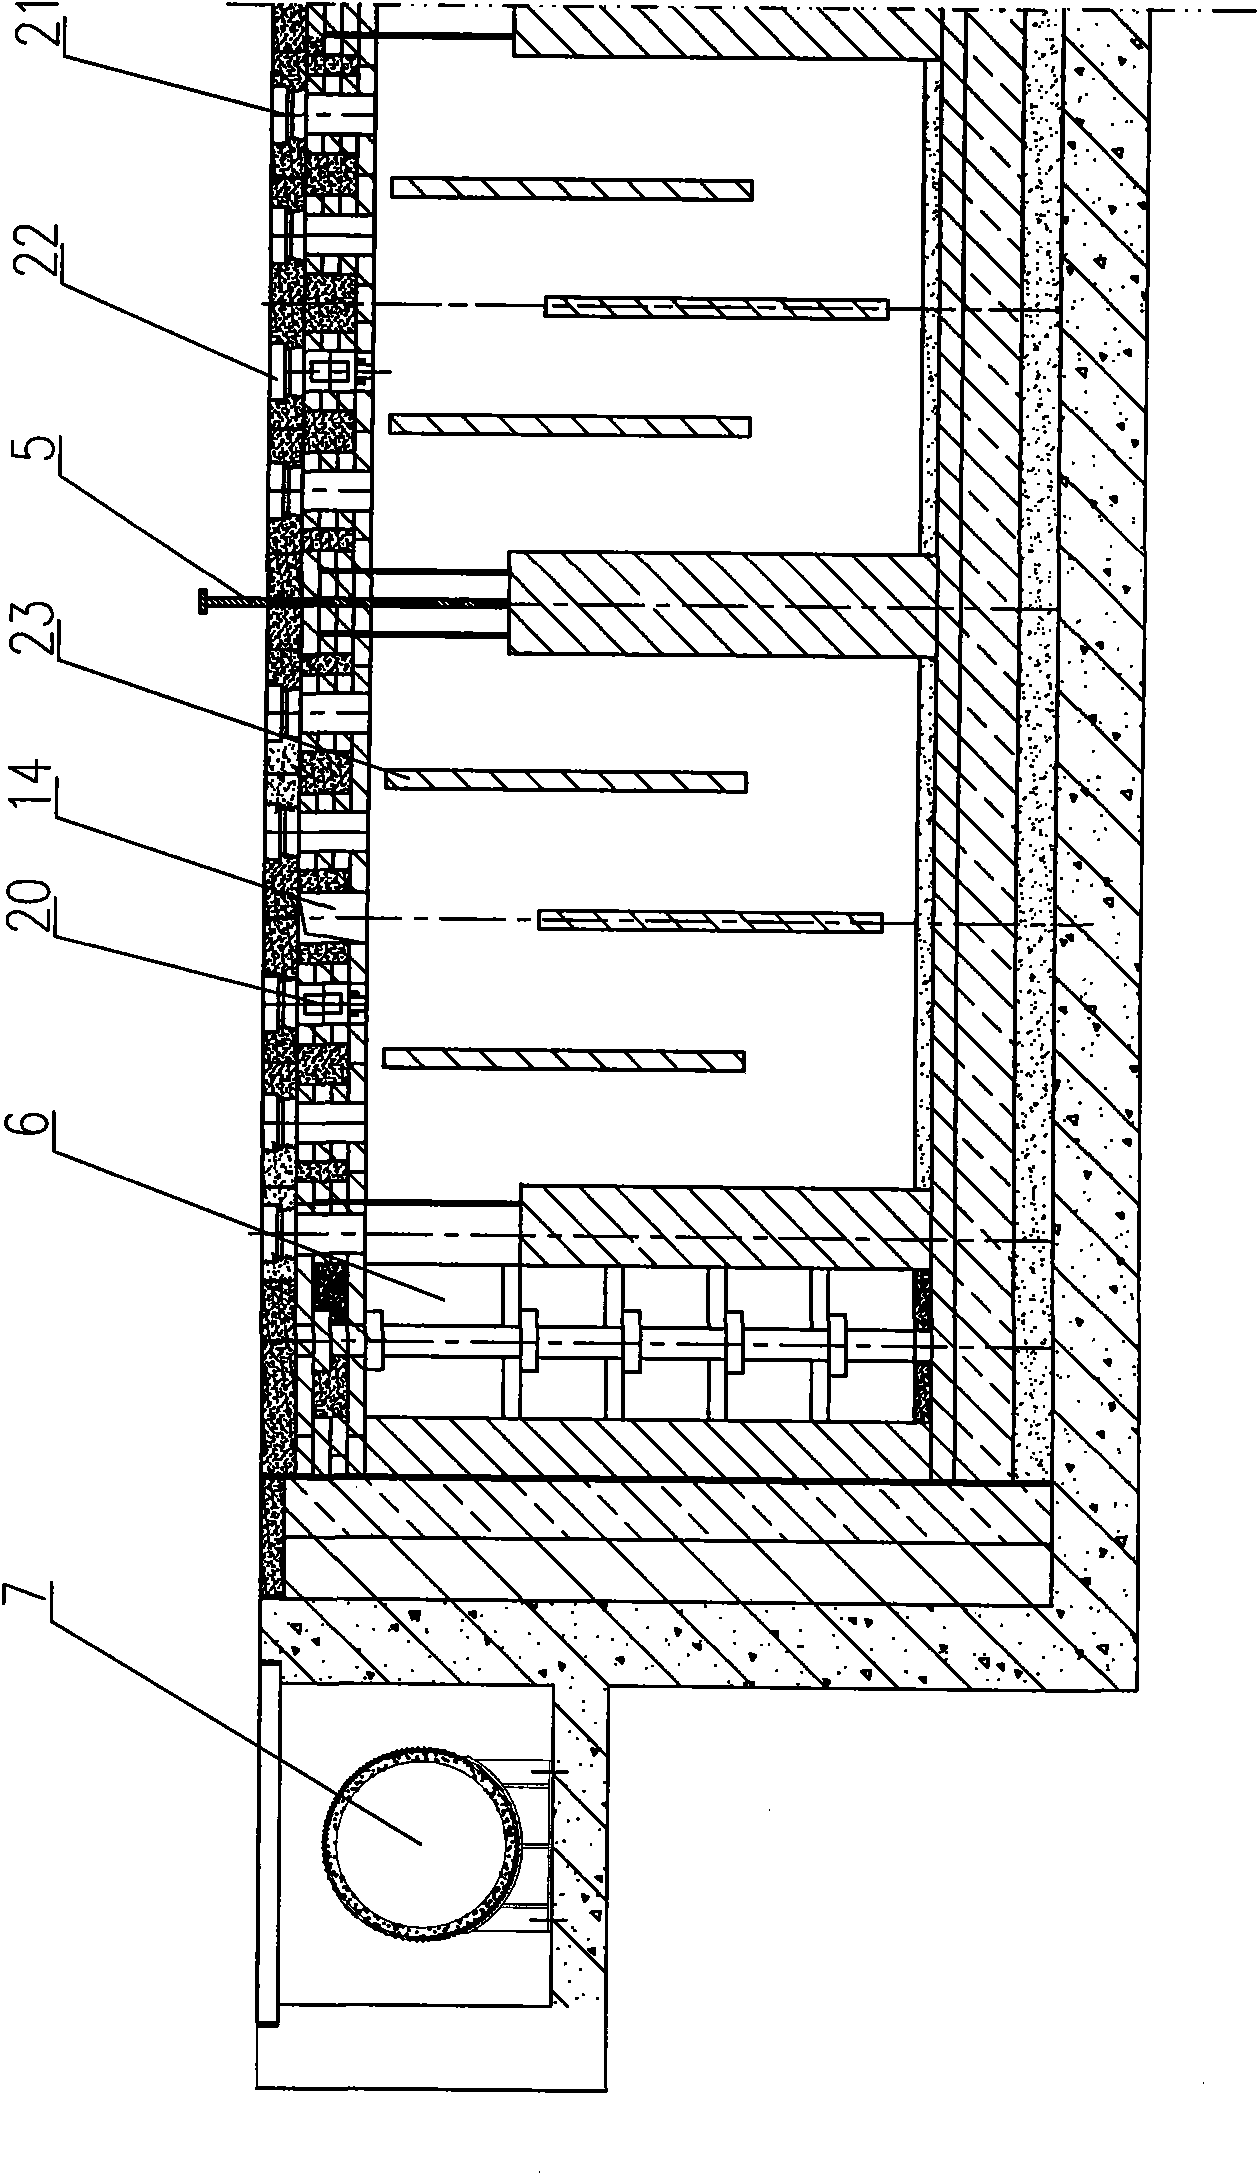 Secondary roasting furnace for carbon products and roasting method of secondary roasting furnace